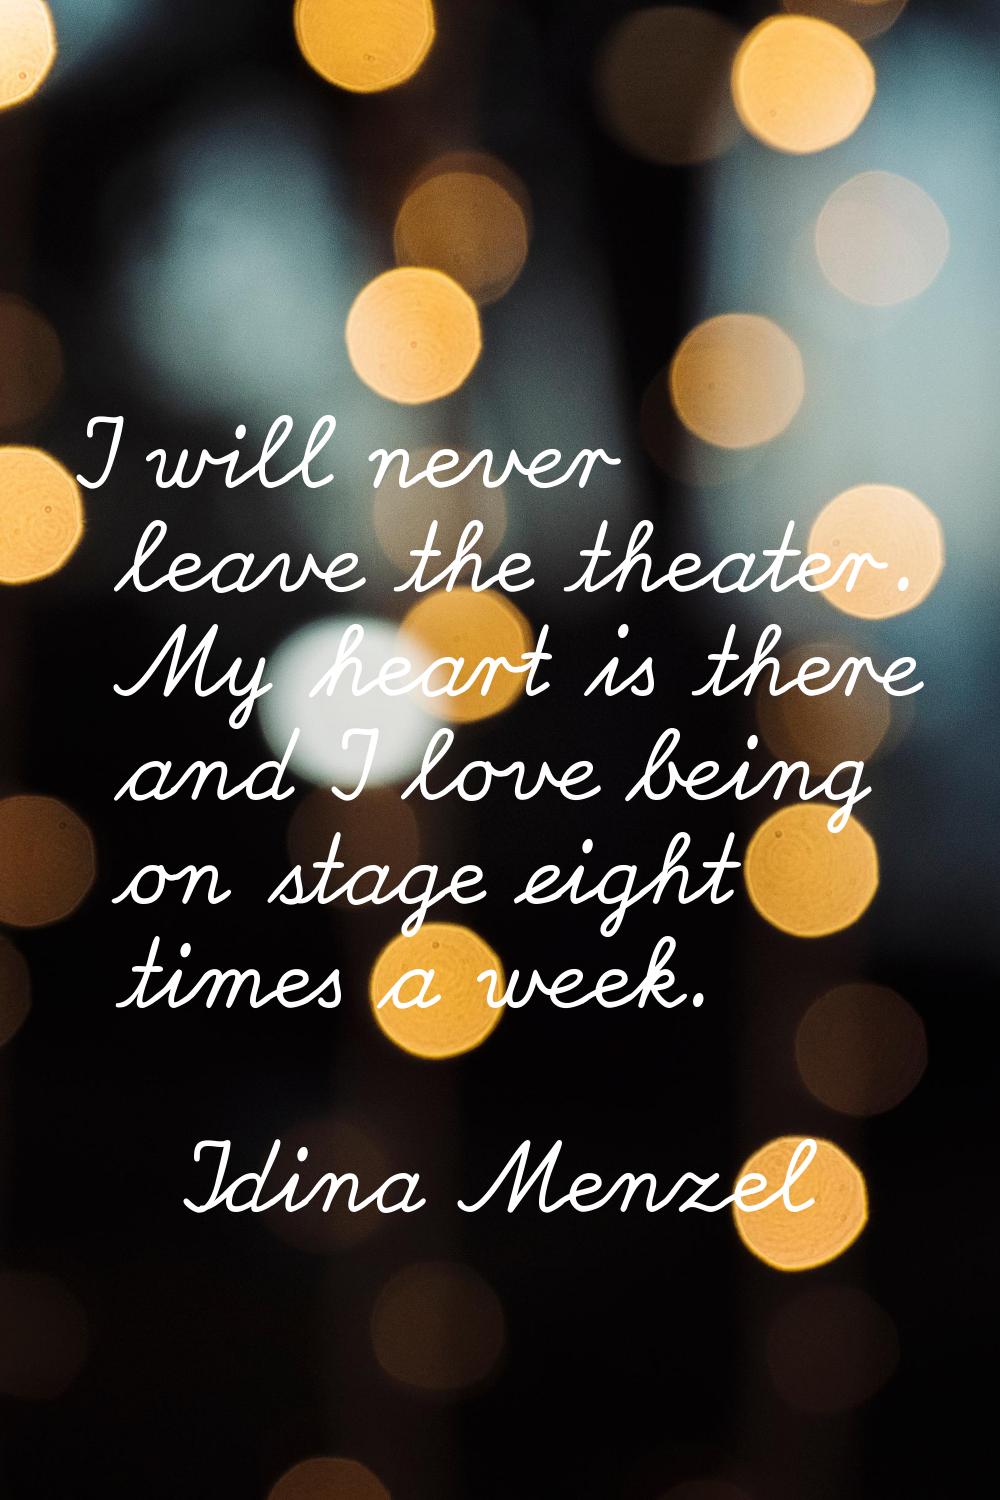 I will never leave the theater. My heart is there and I love being on stage eight times a week.